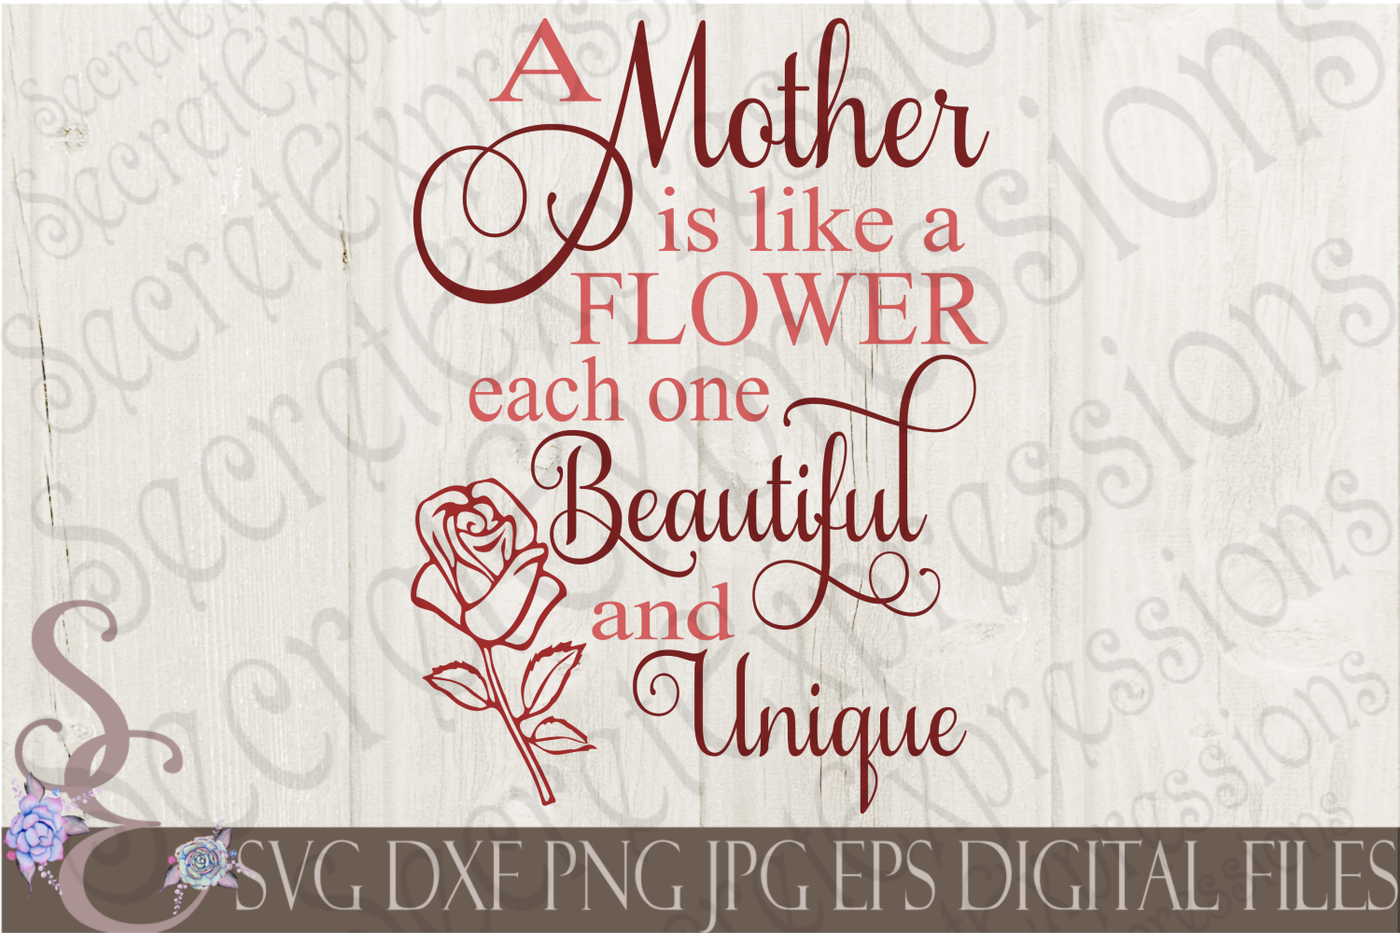 A Mother is like a flower each one beautiful and unique SVG By